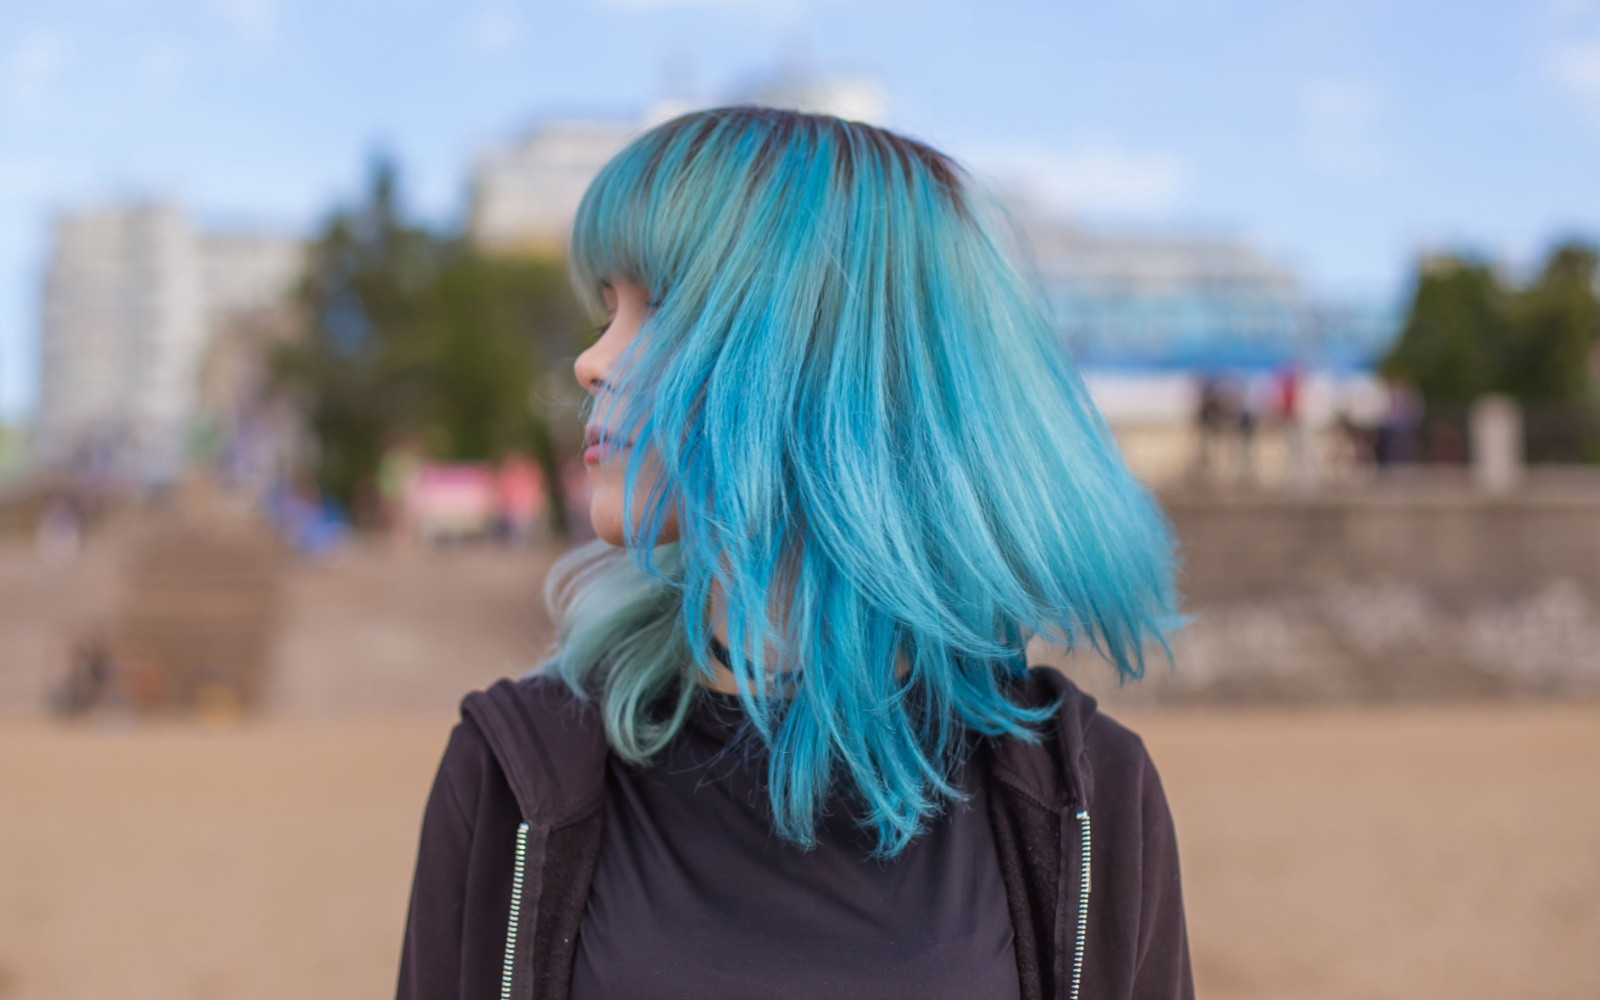 3. Blue Hair Tips Gone Wrong: Common Mistakes to Avoid - wide 8